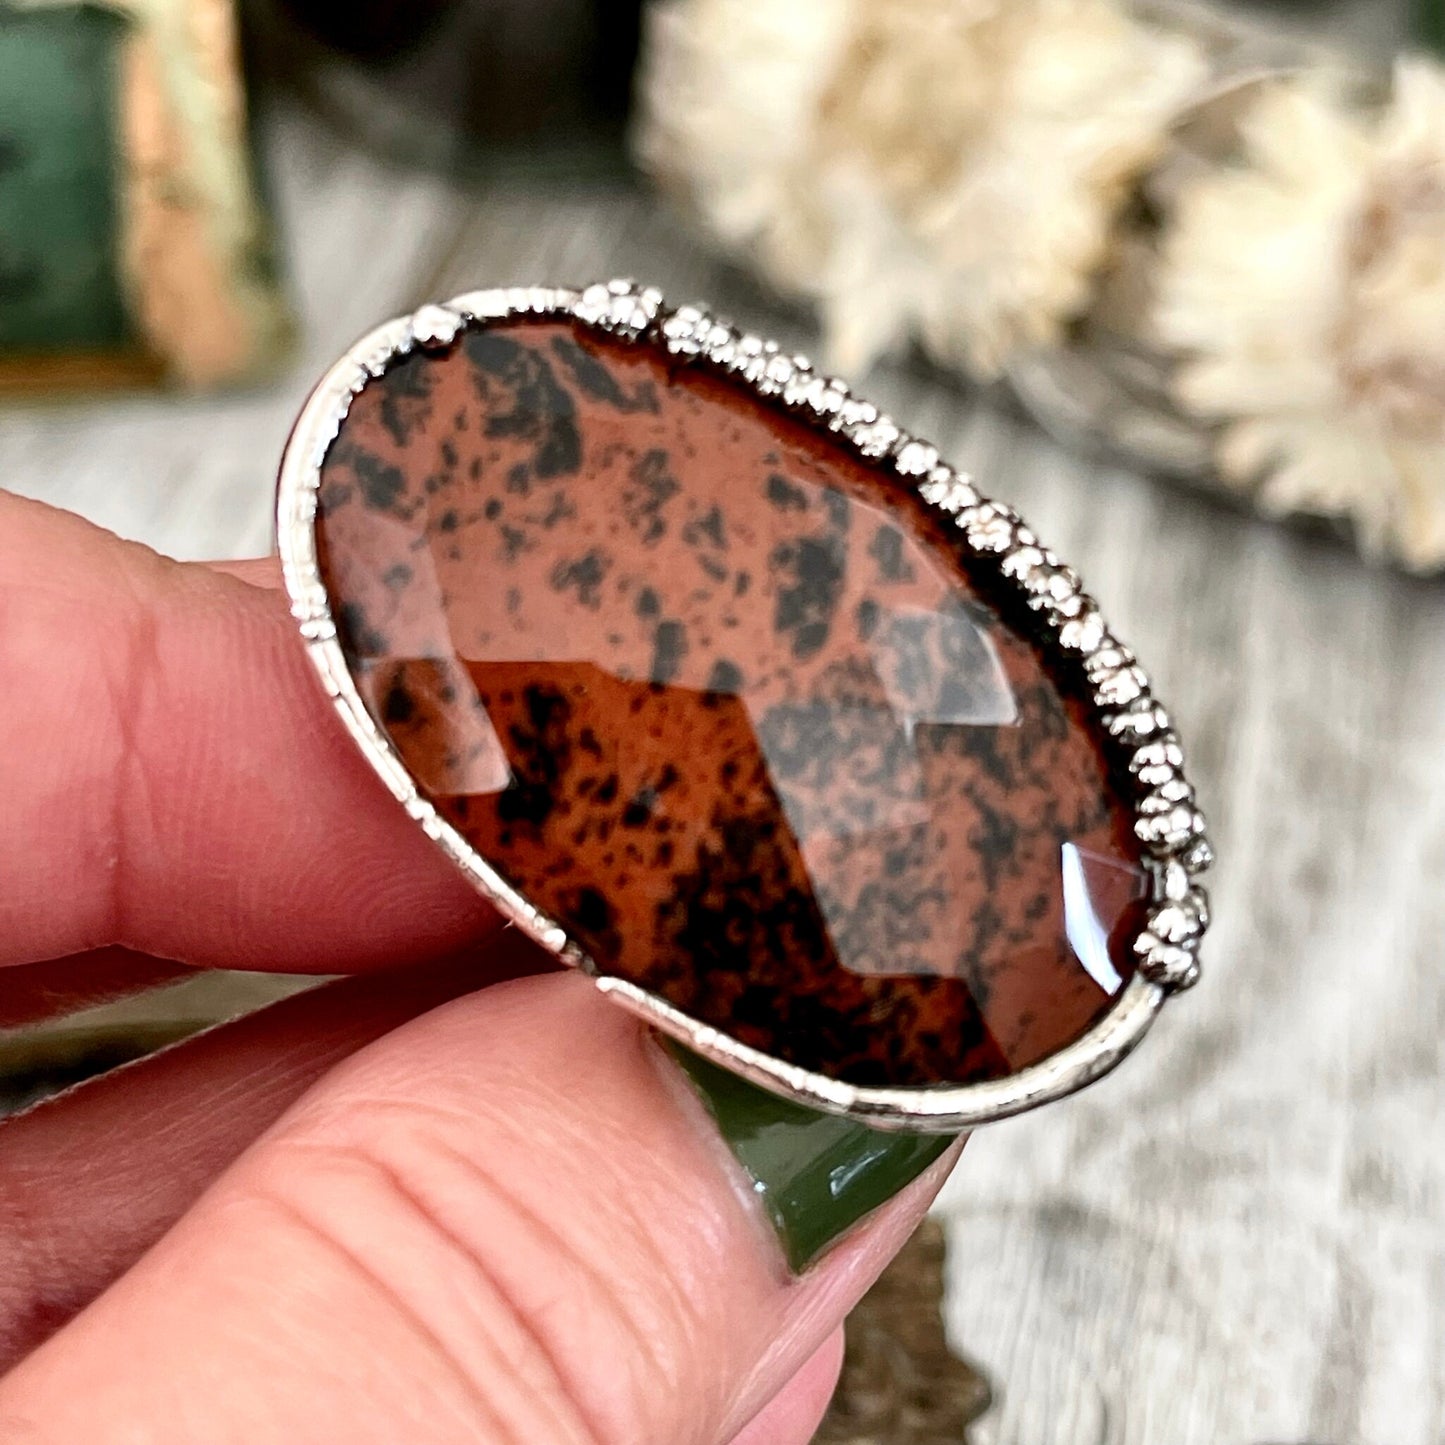 Size 7.5 Mahogany Obsidian Statement Ring in Fine Silver / Foxlark Collection - One of a Kind // Large Black Red Crystal Jewelry Gemstone